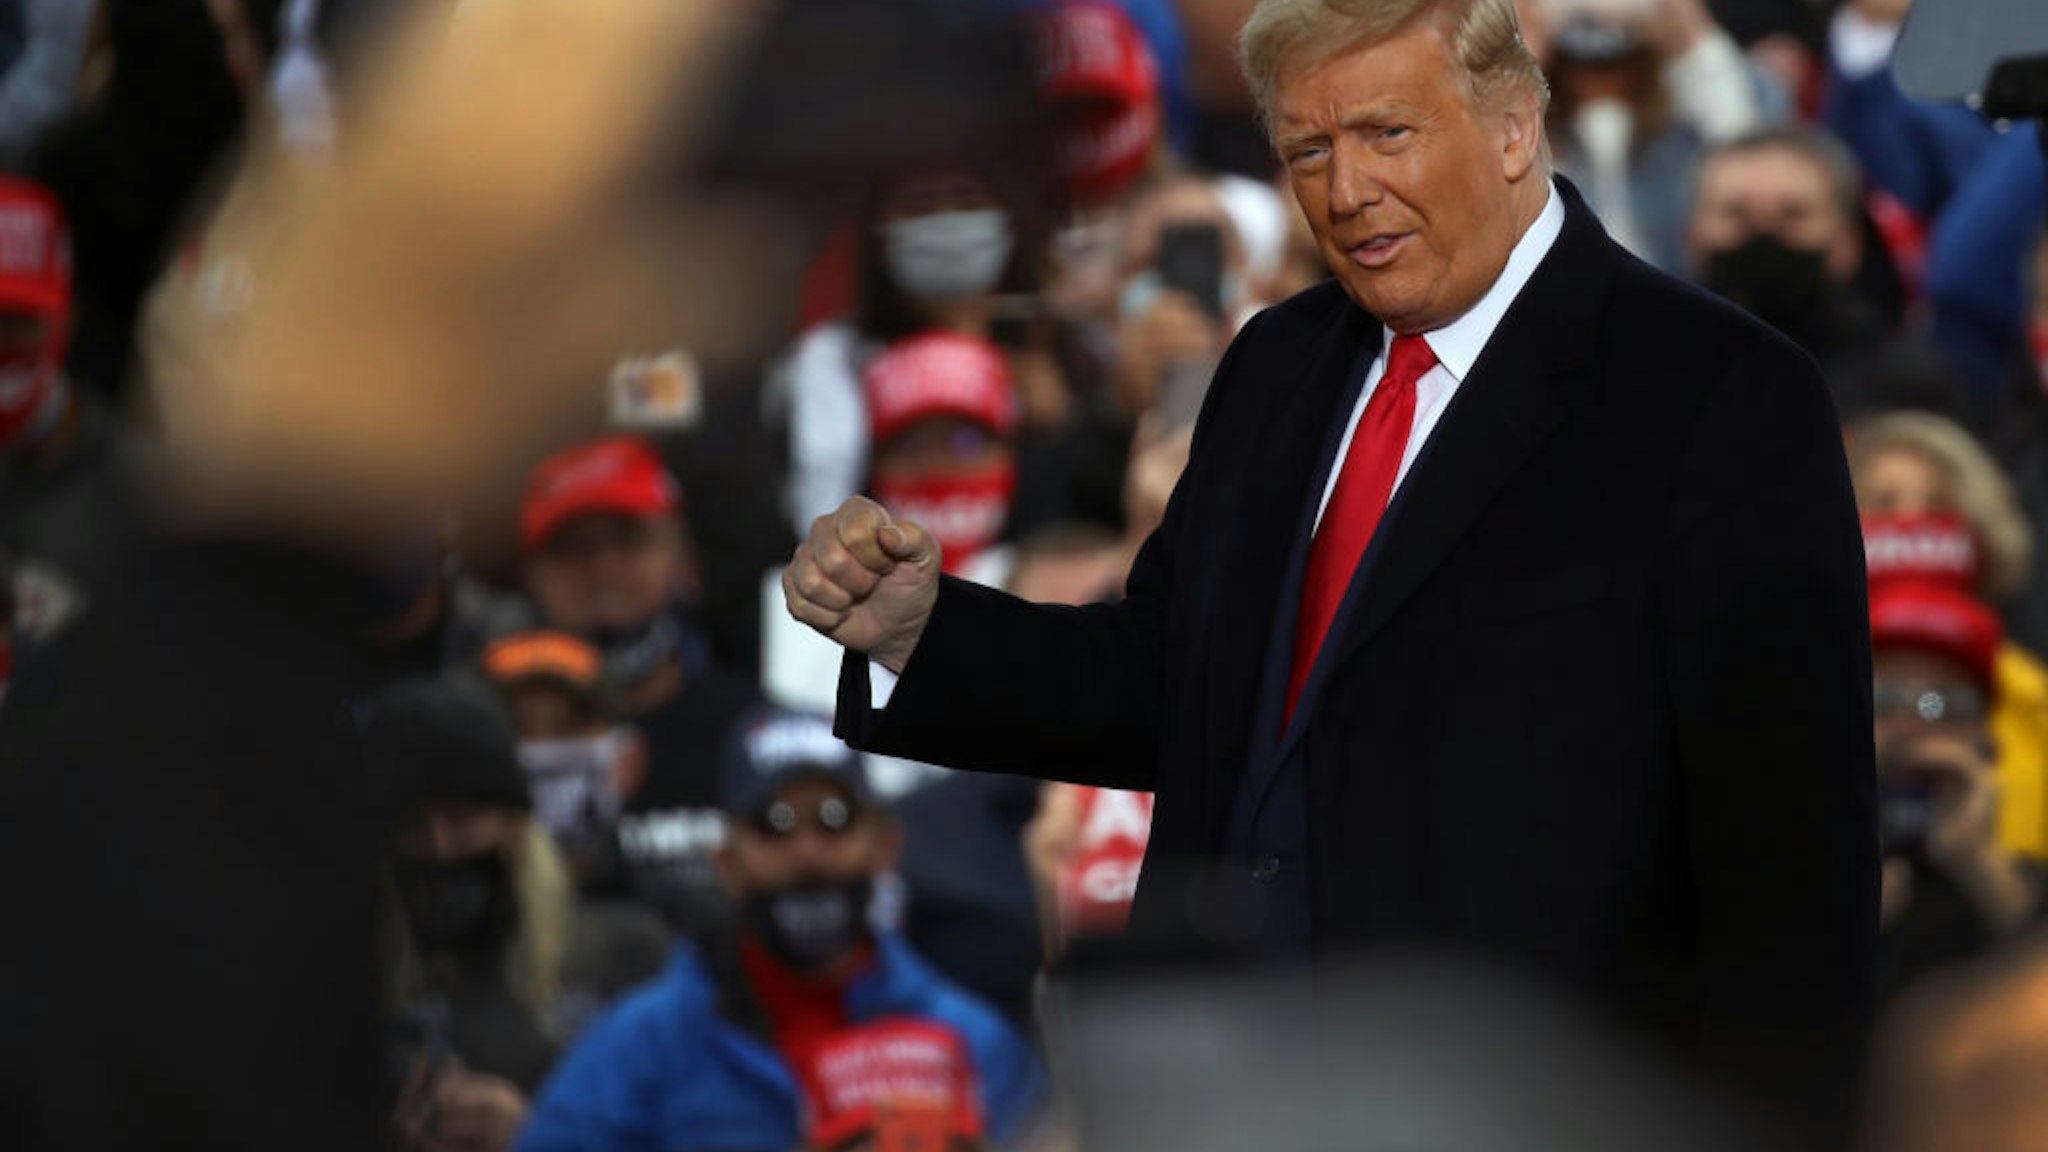 ALLENTOWN, PENNSYLVANIA - OCTOBER 26: President Donald Trump delivers remarks at a rally during the last full week of campaigning before the presidential election on October 26, 2020 in Allentown, Pennsylvania. Trump still trails his opponent Joe Biden in most major polls as Americans prepare to go to the polls to choose their next president on November 3rd. Pennsylvania. (Photo by Spencer Platt/Getty Images)